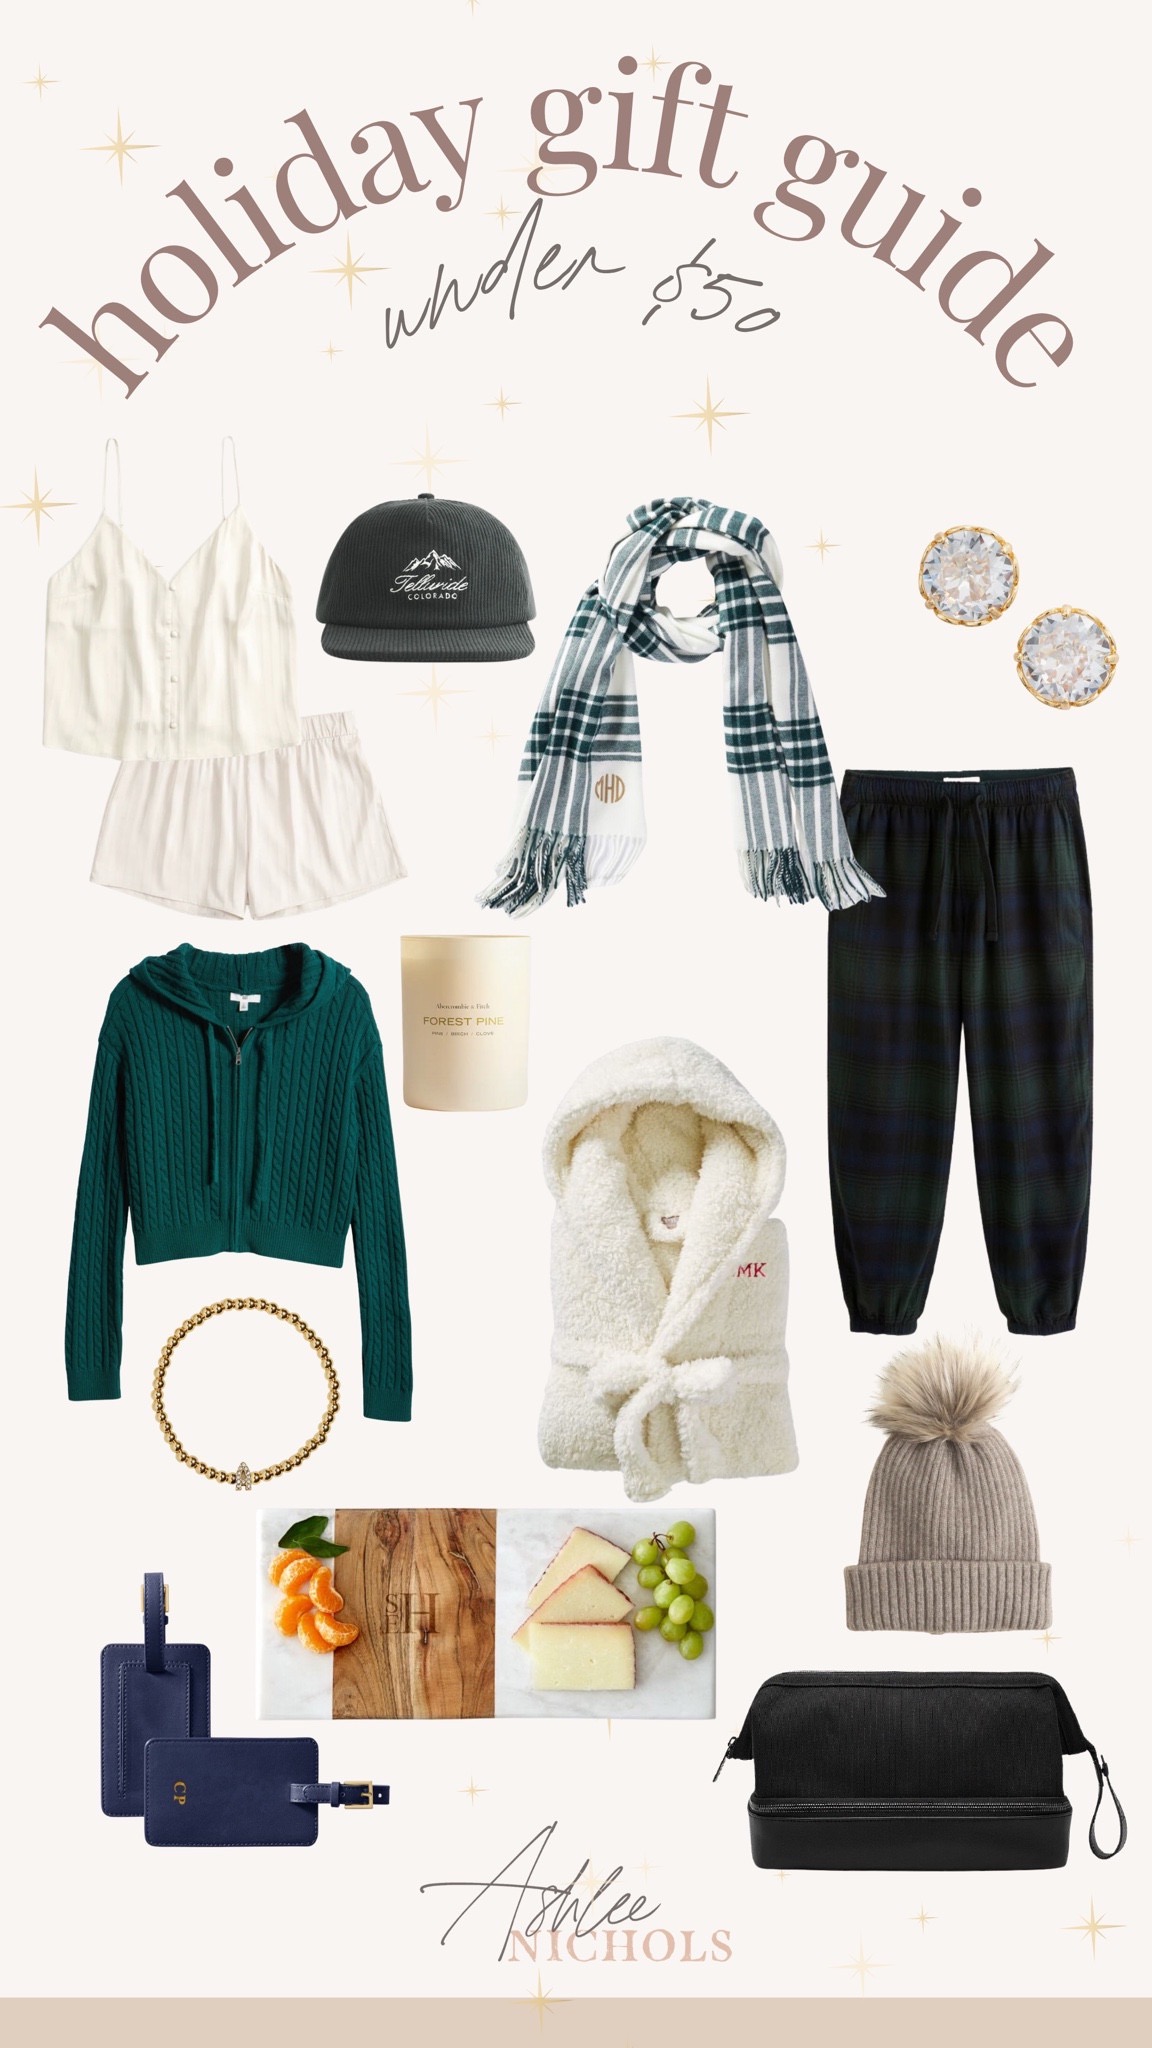 Holiday Gift Guide – Cozy Gifts for Her - Ashlee Nichols